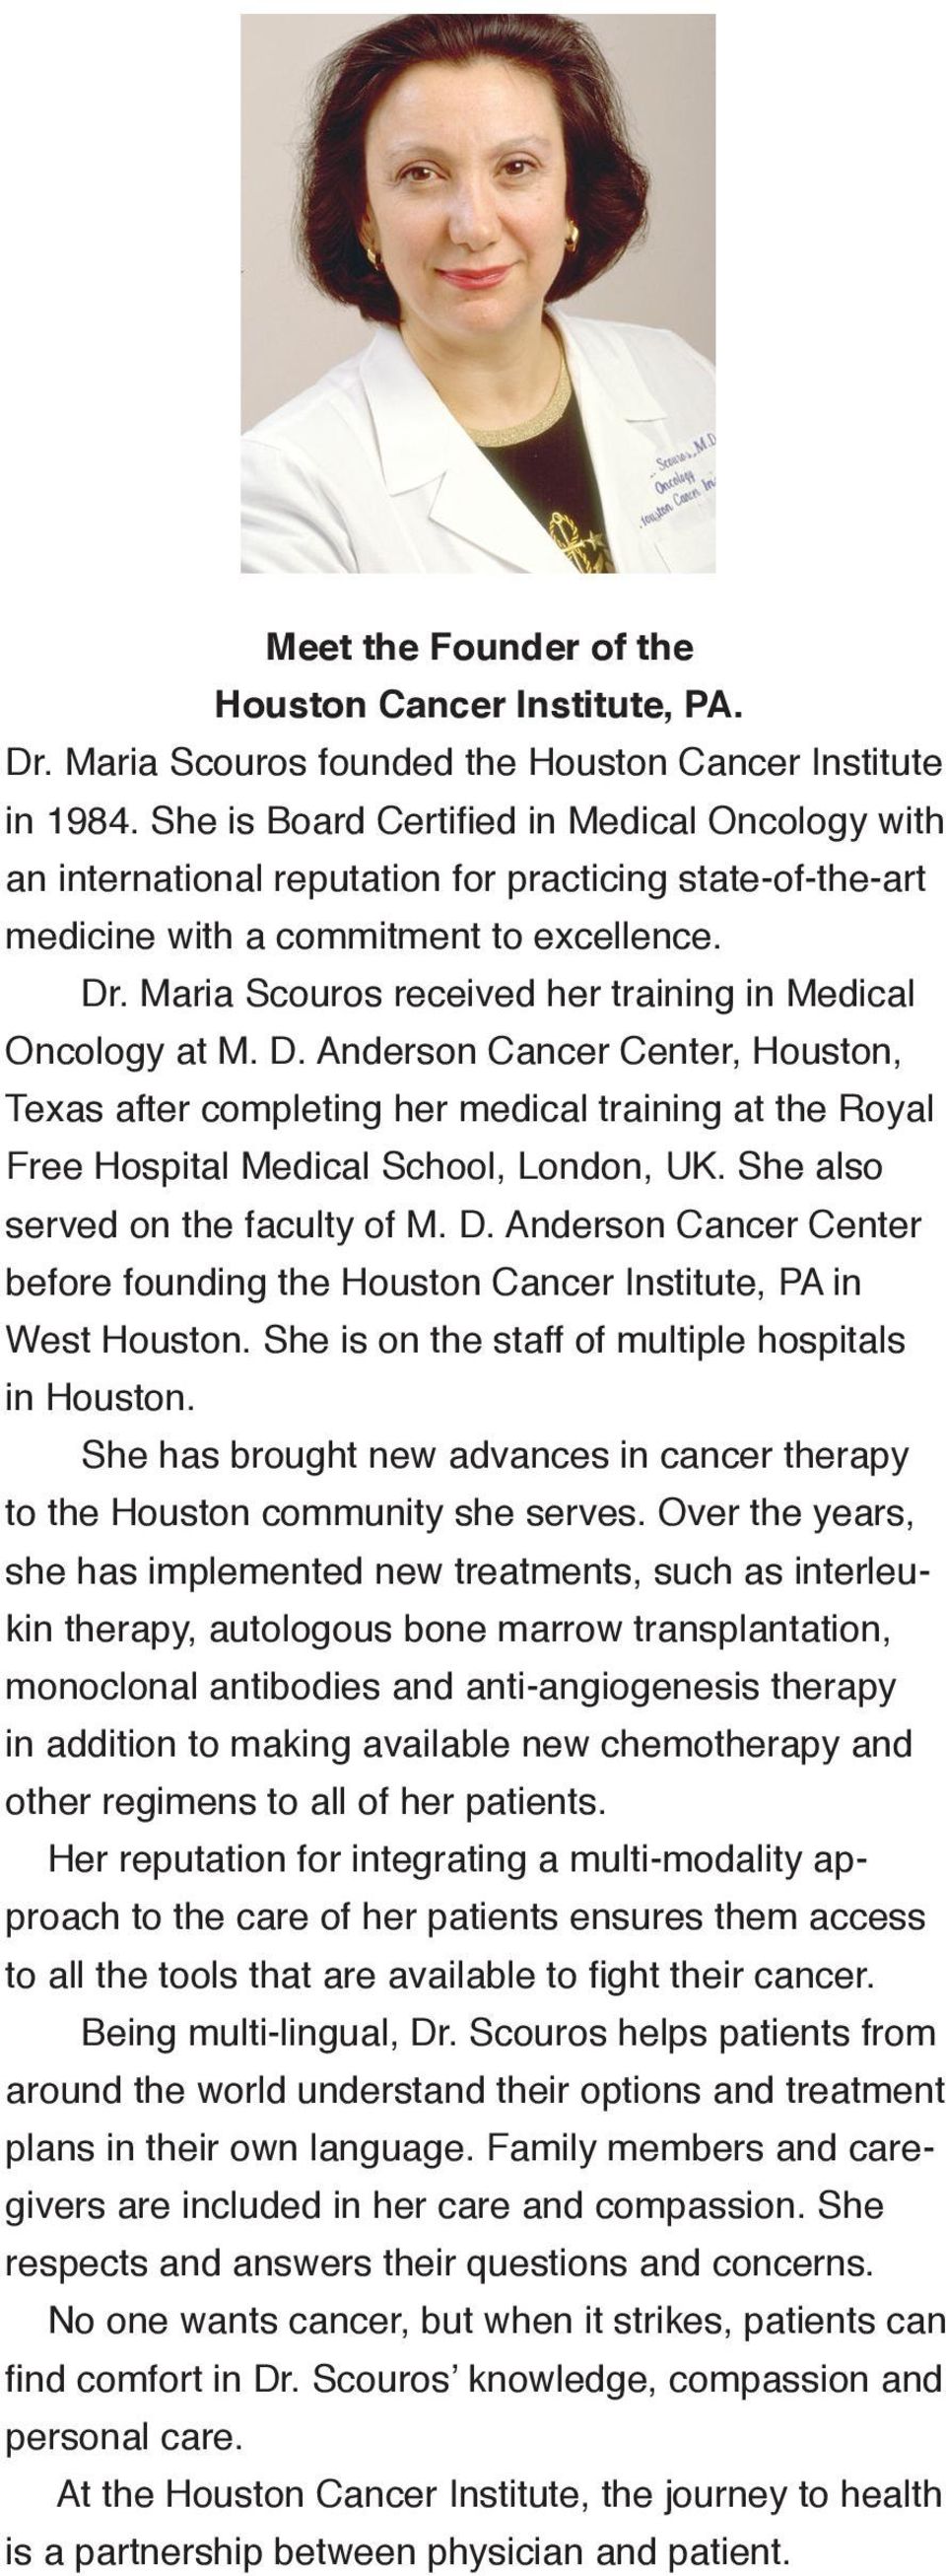 Maria Scouros received her training in Medical Oncology at M. D. Anderson Cancer Center, Houston, Texas after completing her medical training at the Royal Free Hospital Medical School, London, UK.